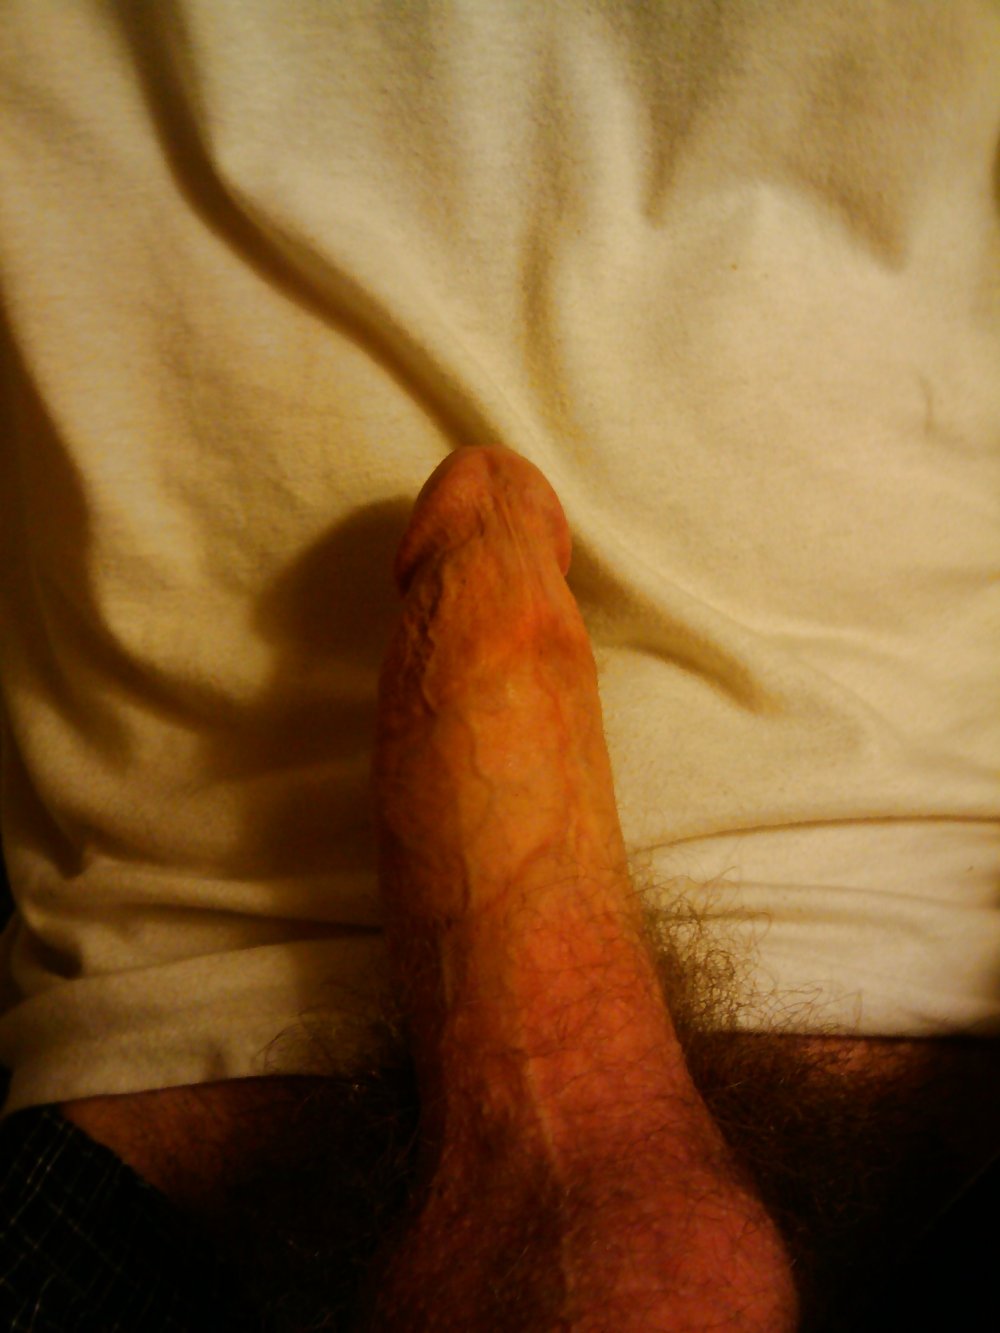 My cock #15159